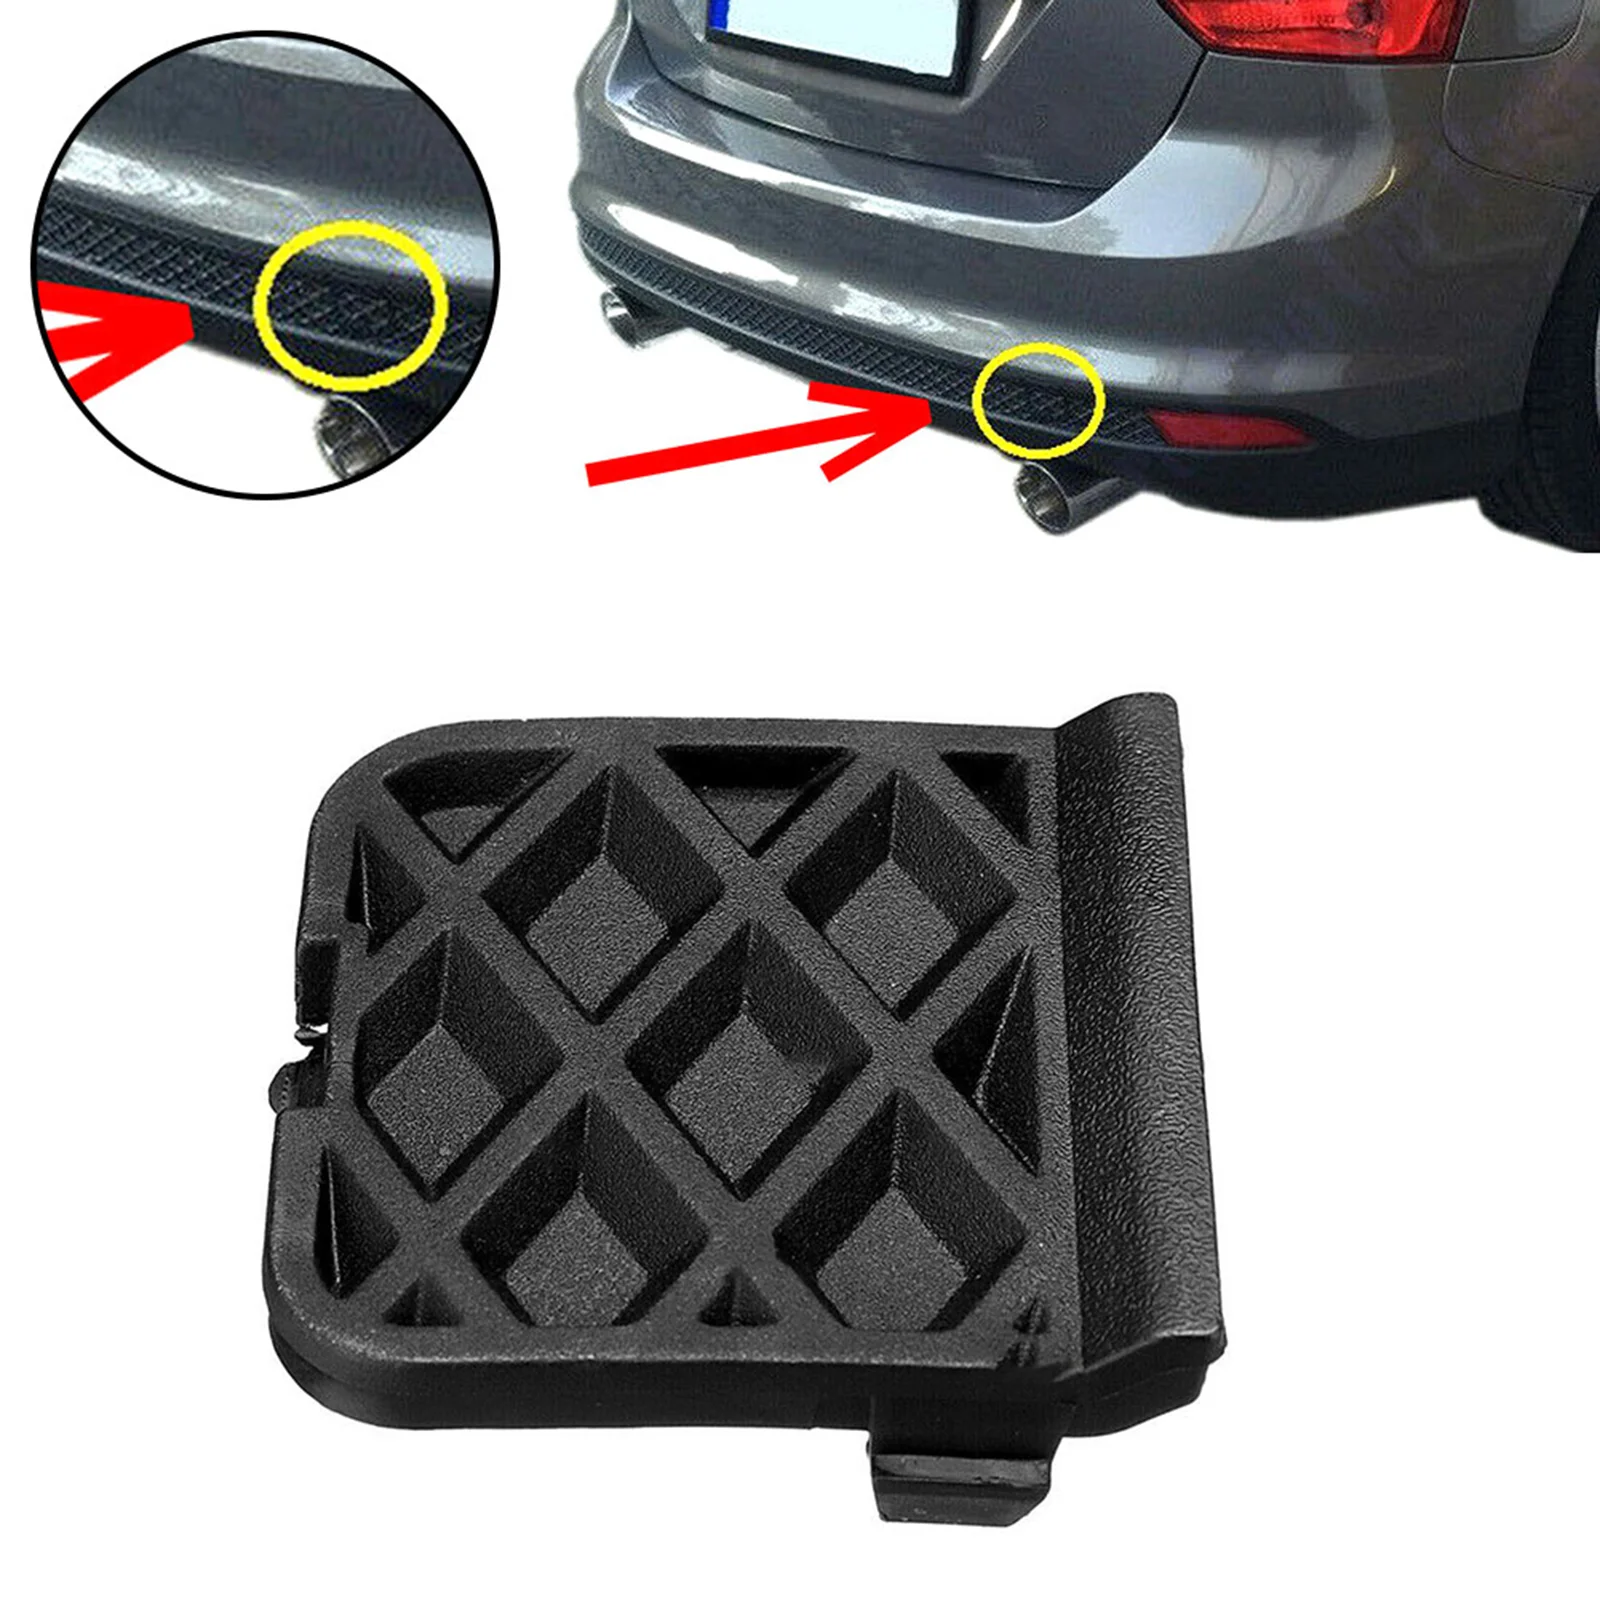 1705332/ Exterior Rear Bumper Tow Hook Eye Cover Cap for Ford Focus